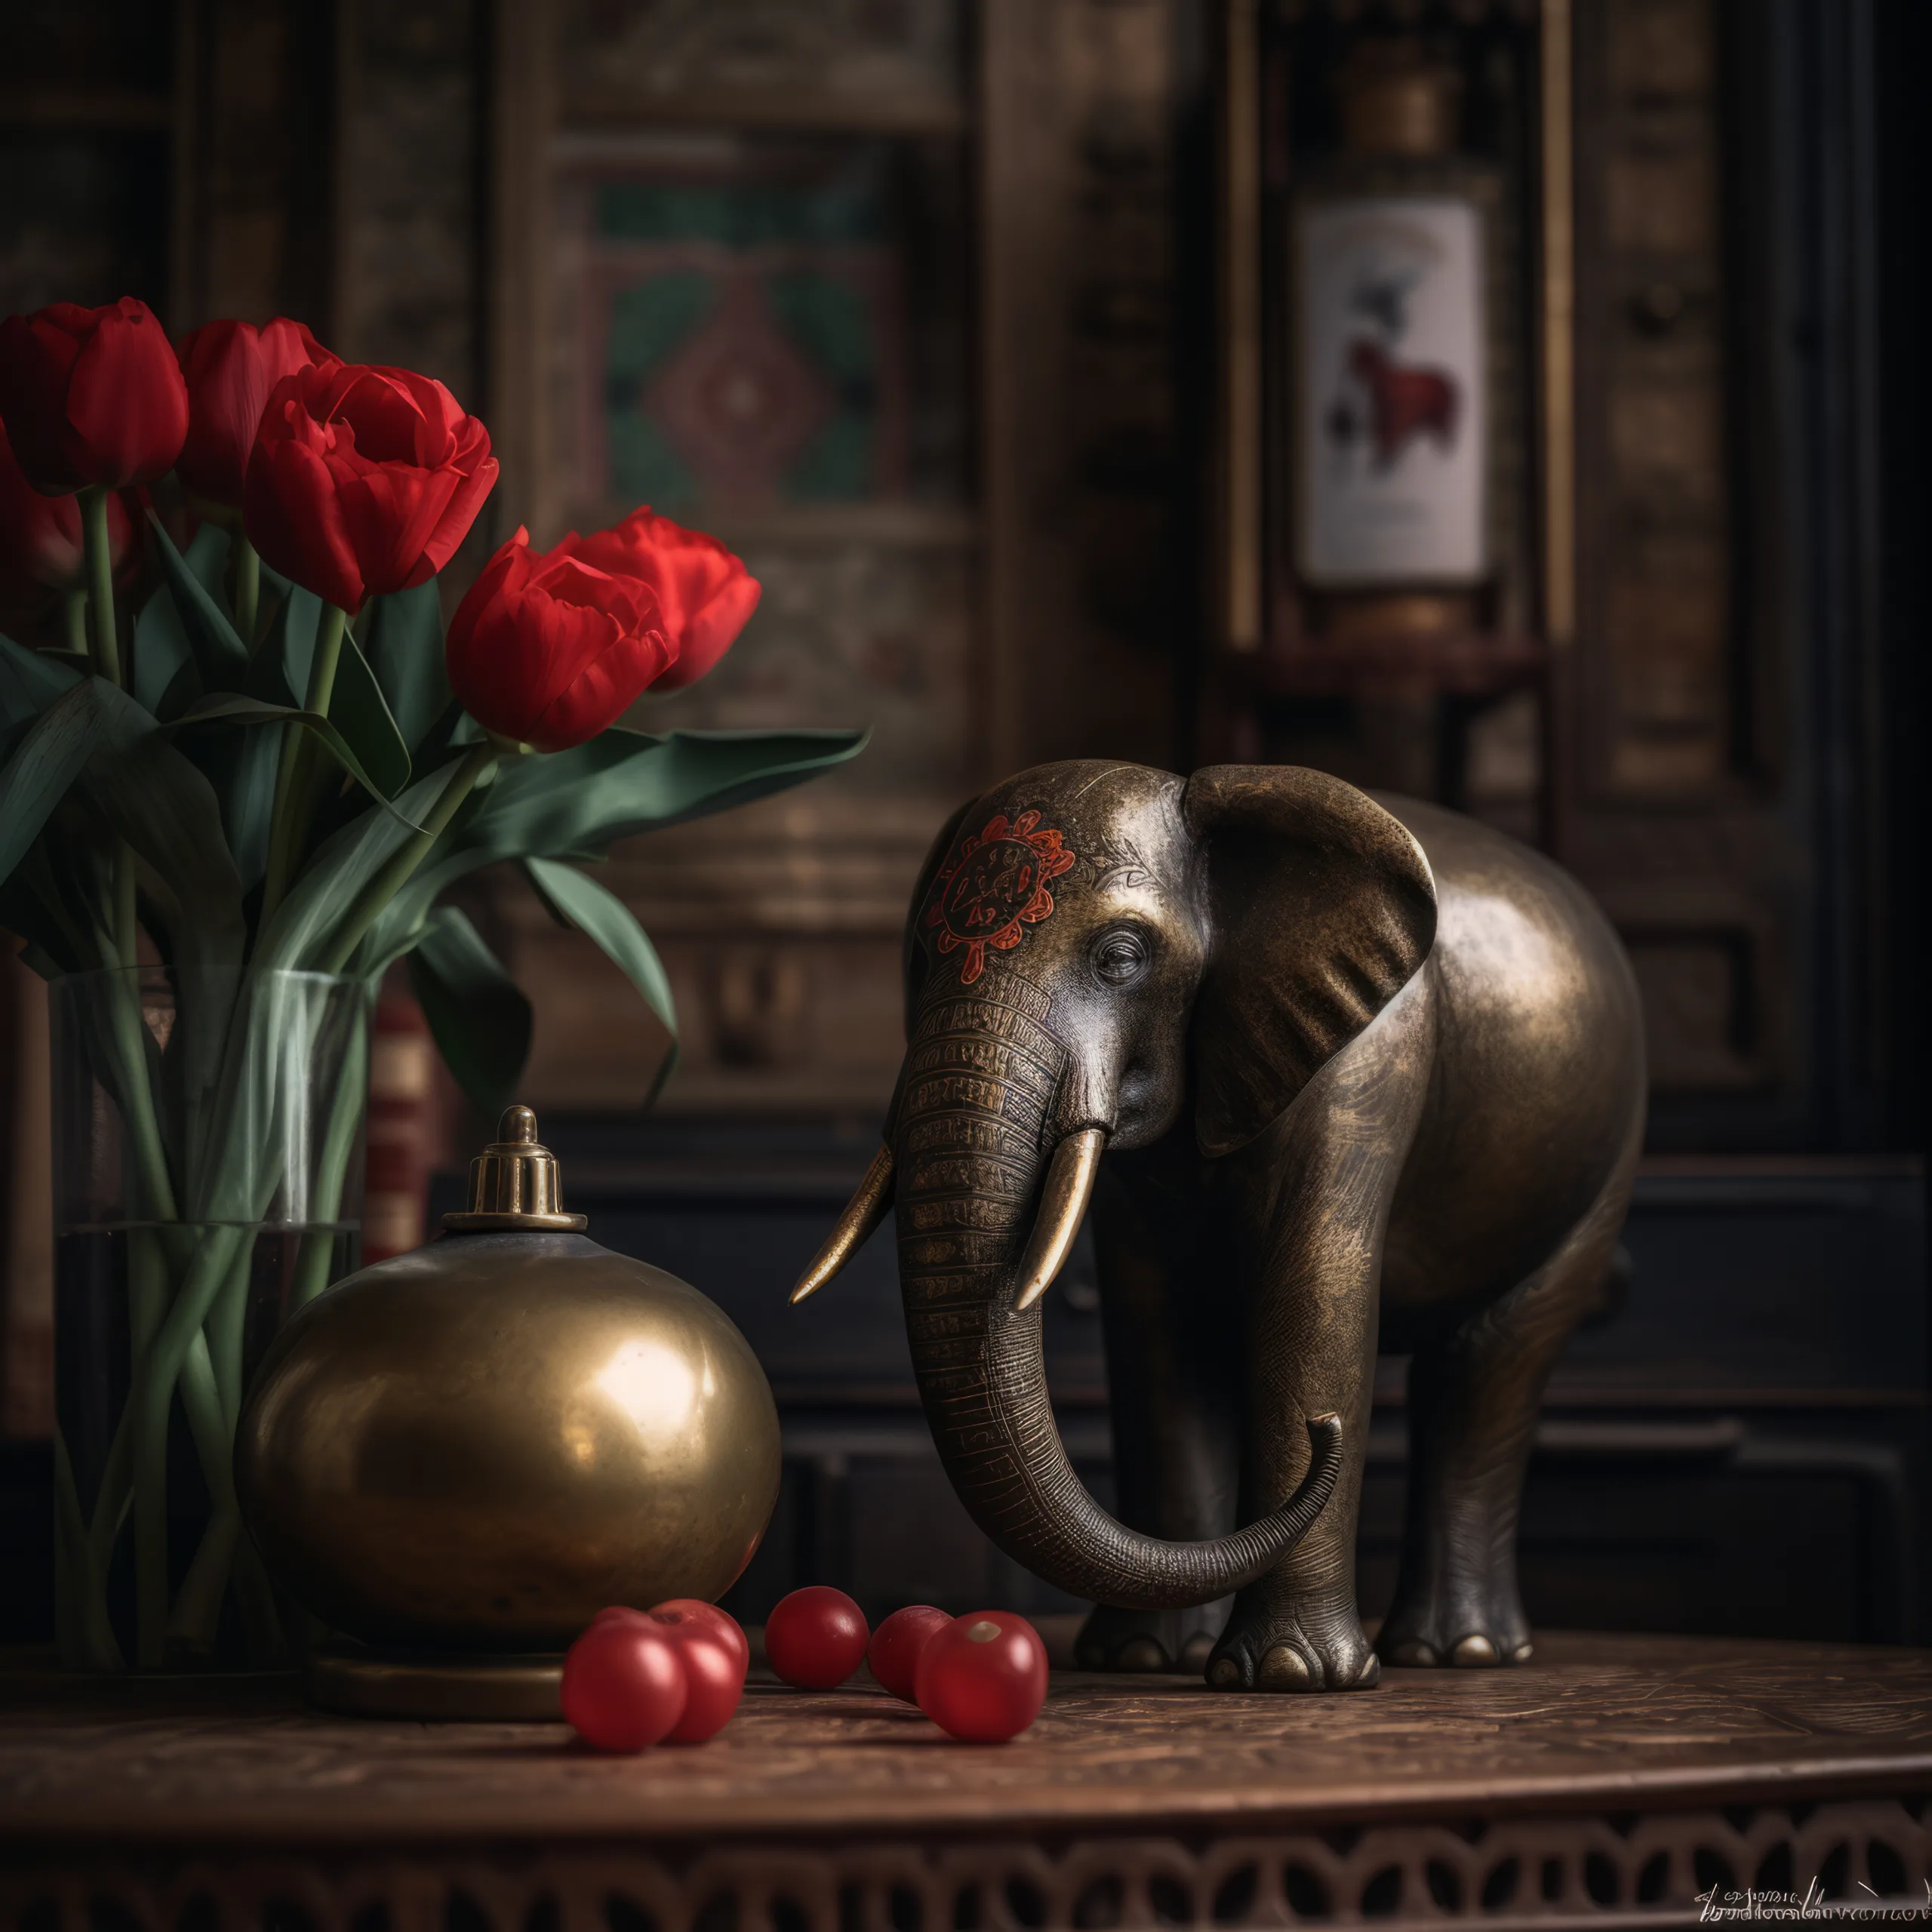 Product photography: a statue of an elephant next to a vase of flowers.